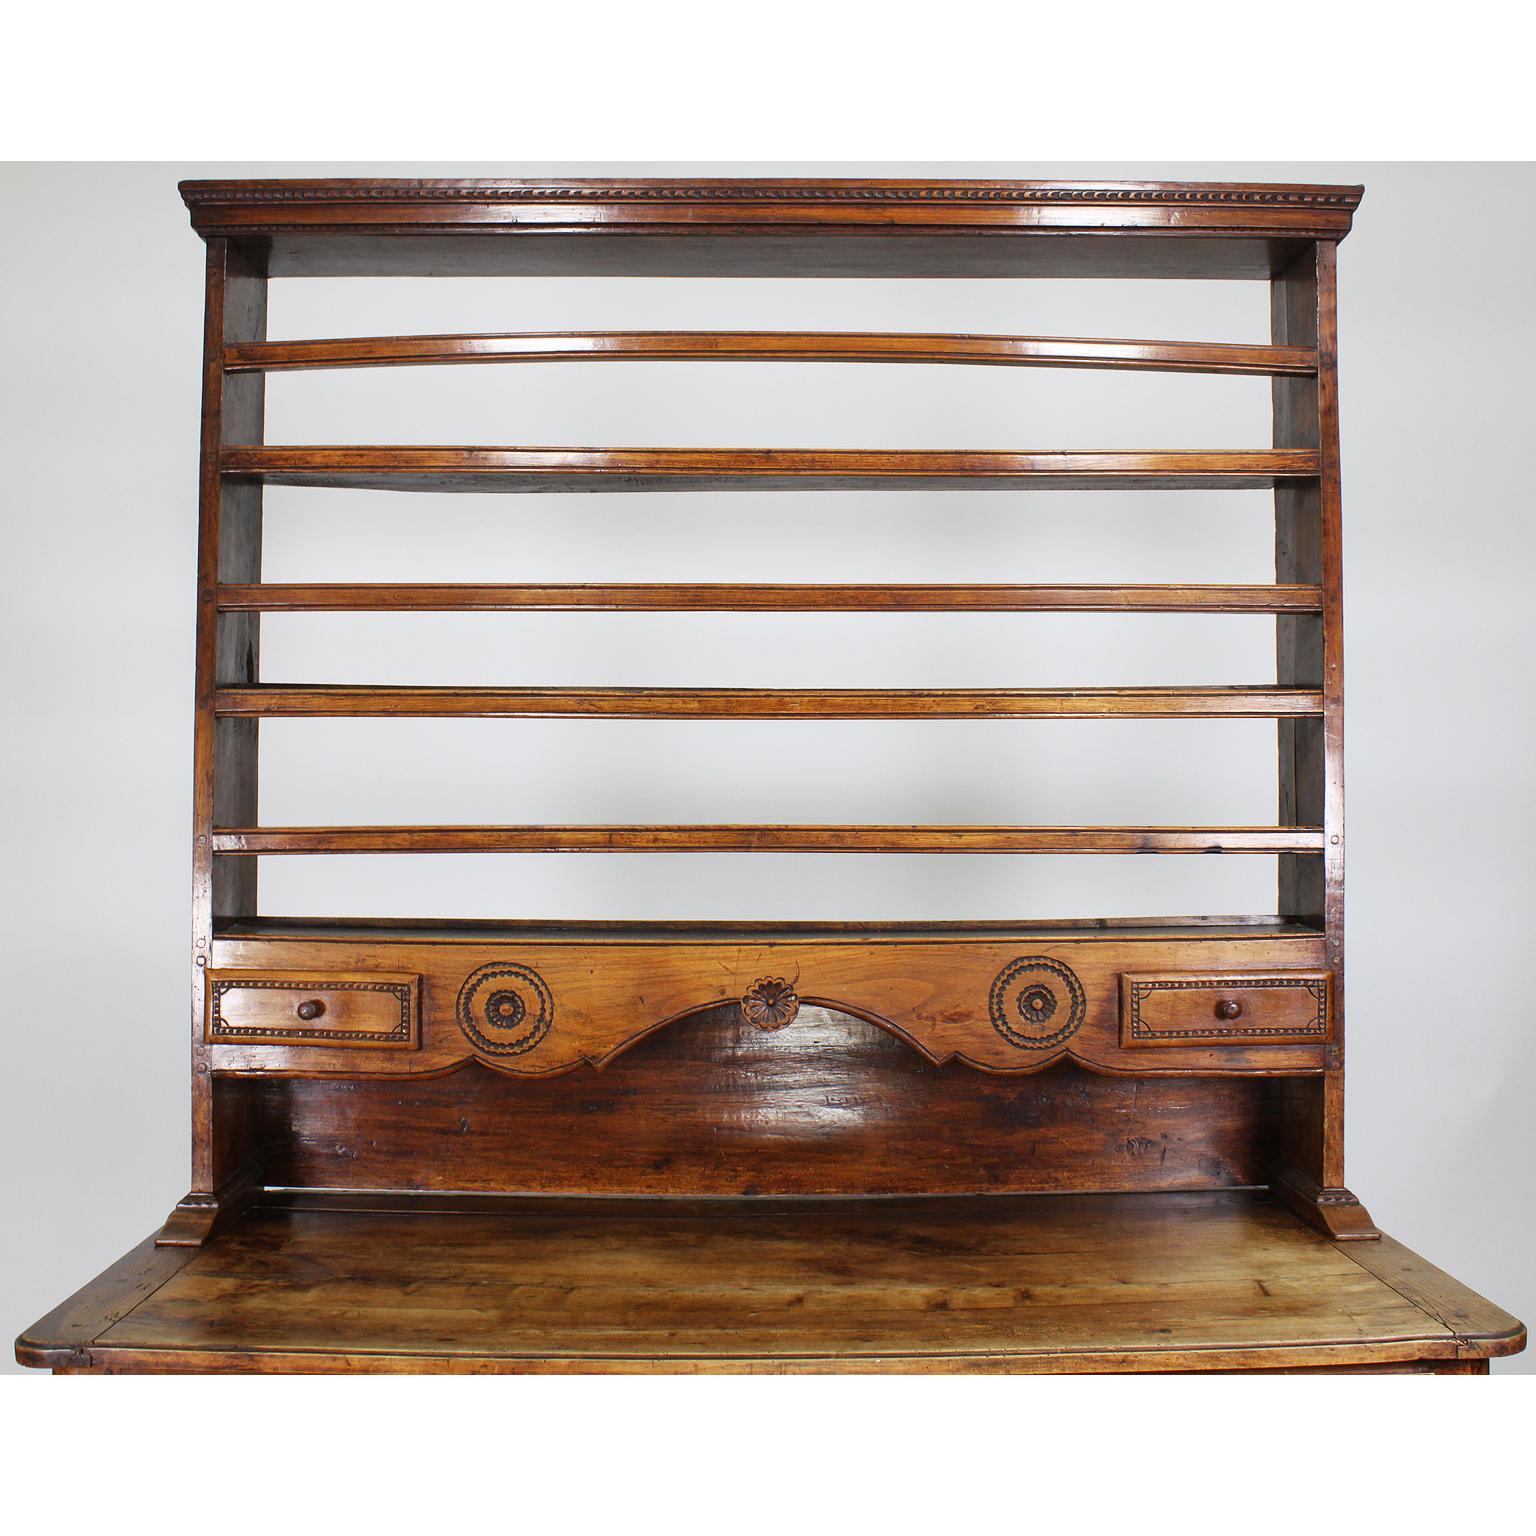 Carved A French 18th-19th C. Provincial Louis  XV Style Walnut Vaisselier Hutch Buffet For Sale